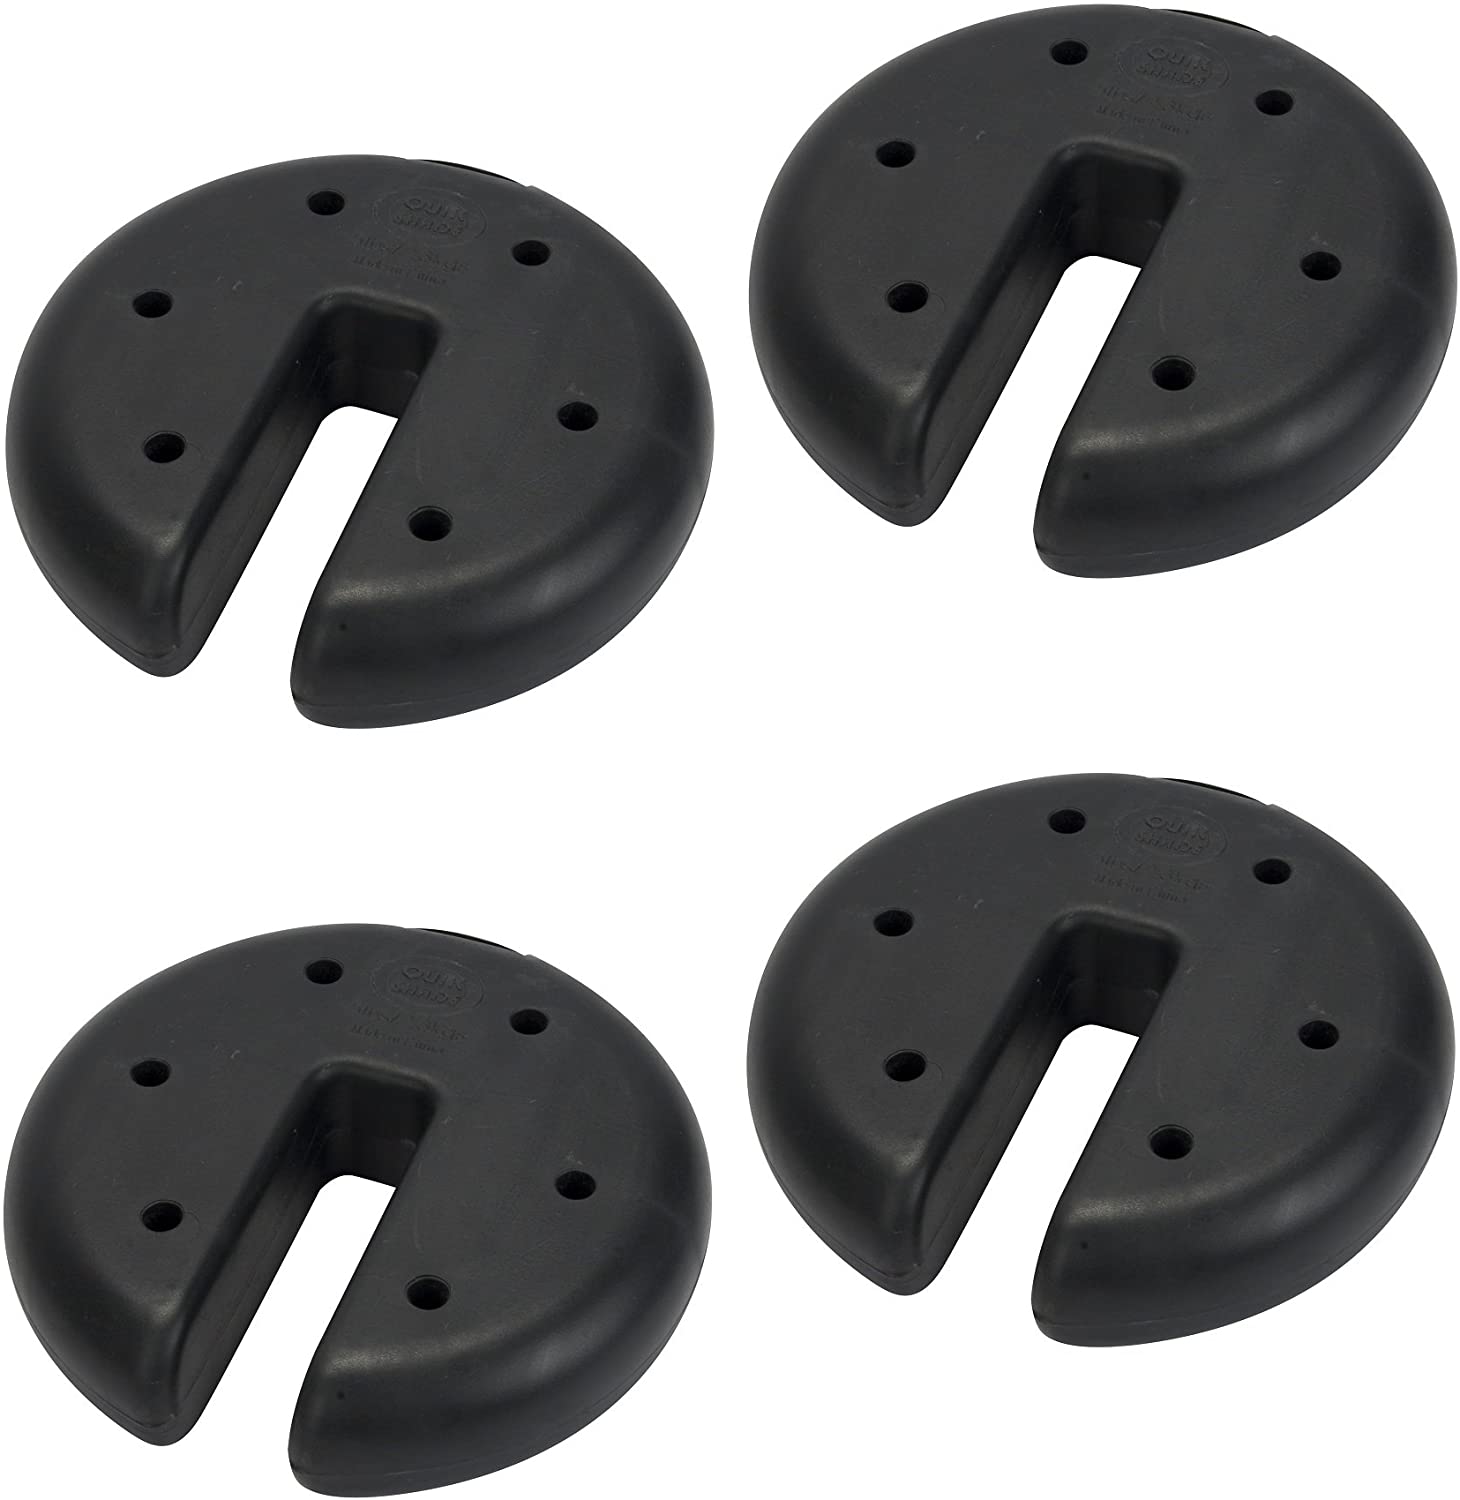 Quik Shade Canopy Weight Plate Kit